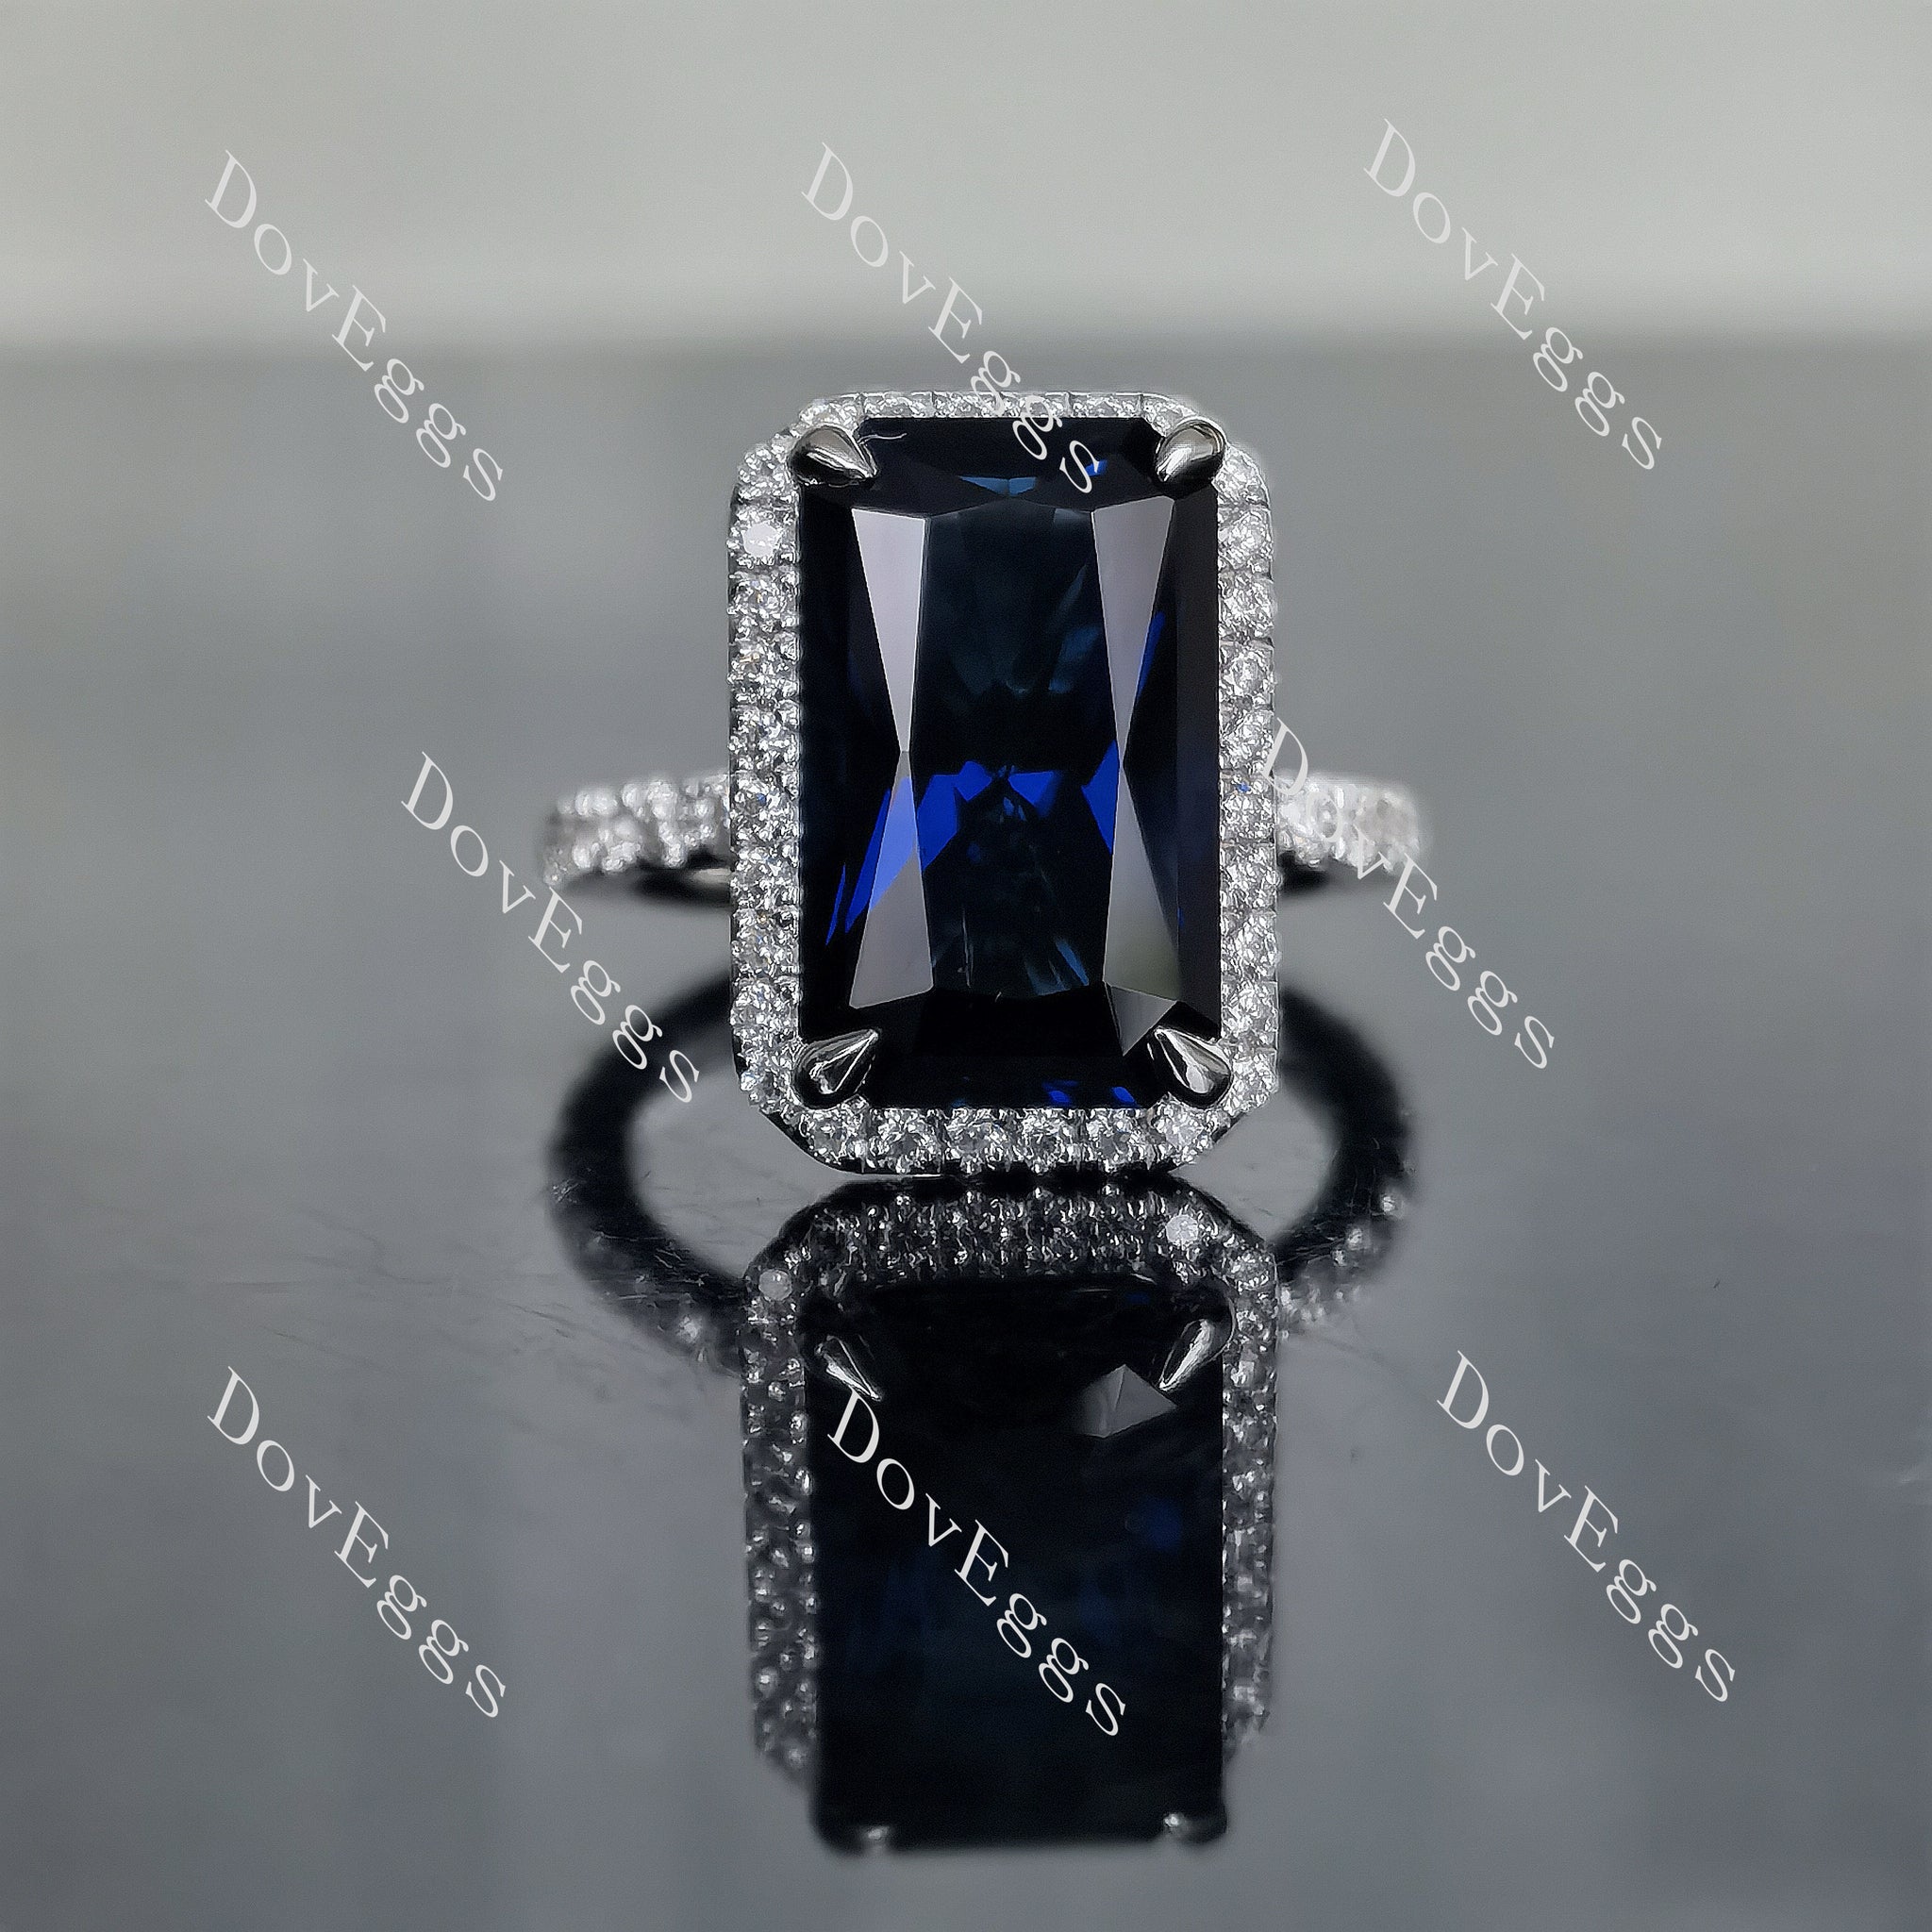 Doveggs elongated radiant halo pave colored gem ring